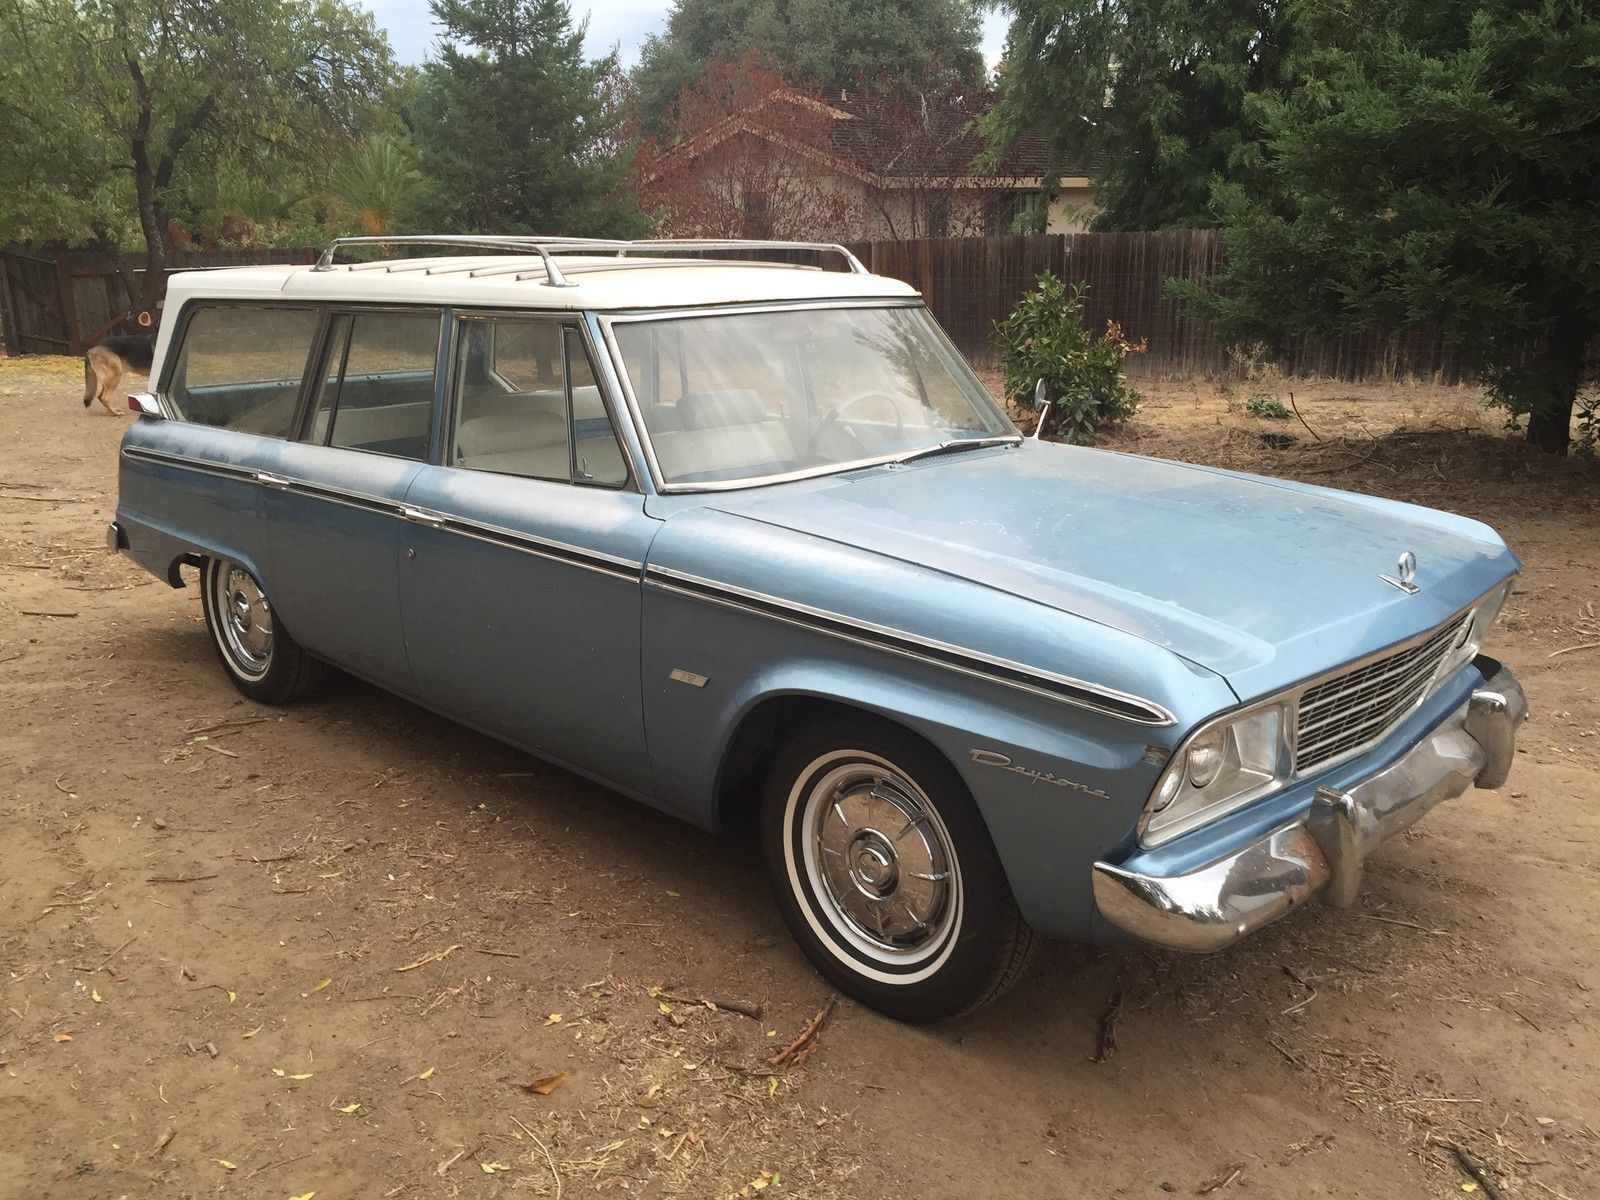 This 1964 Studebaker Daytona Wagonaire Could Be The Replacement For A Soul-Sucking SUV